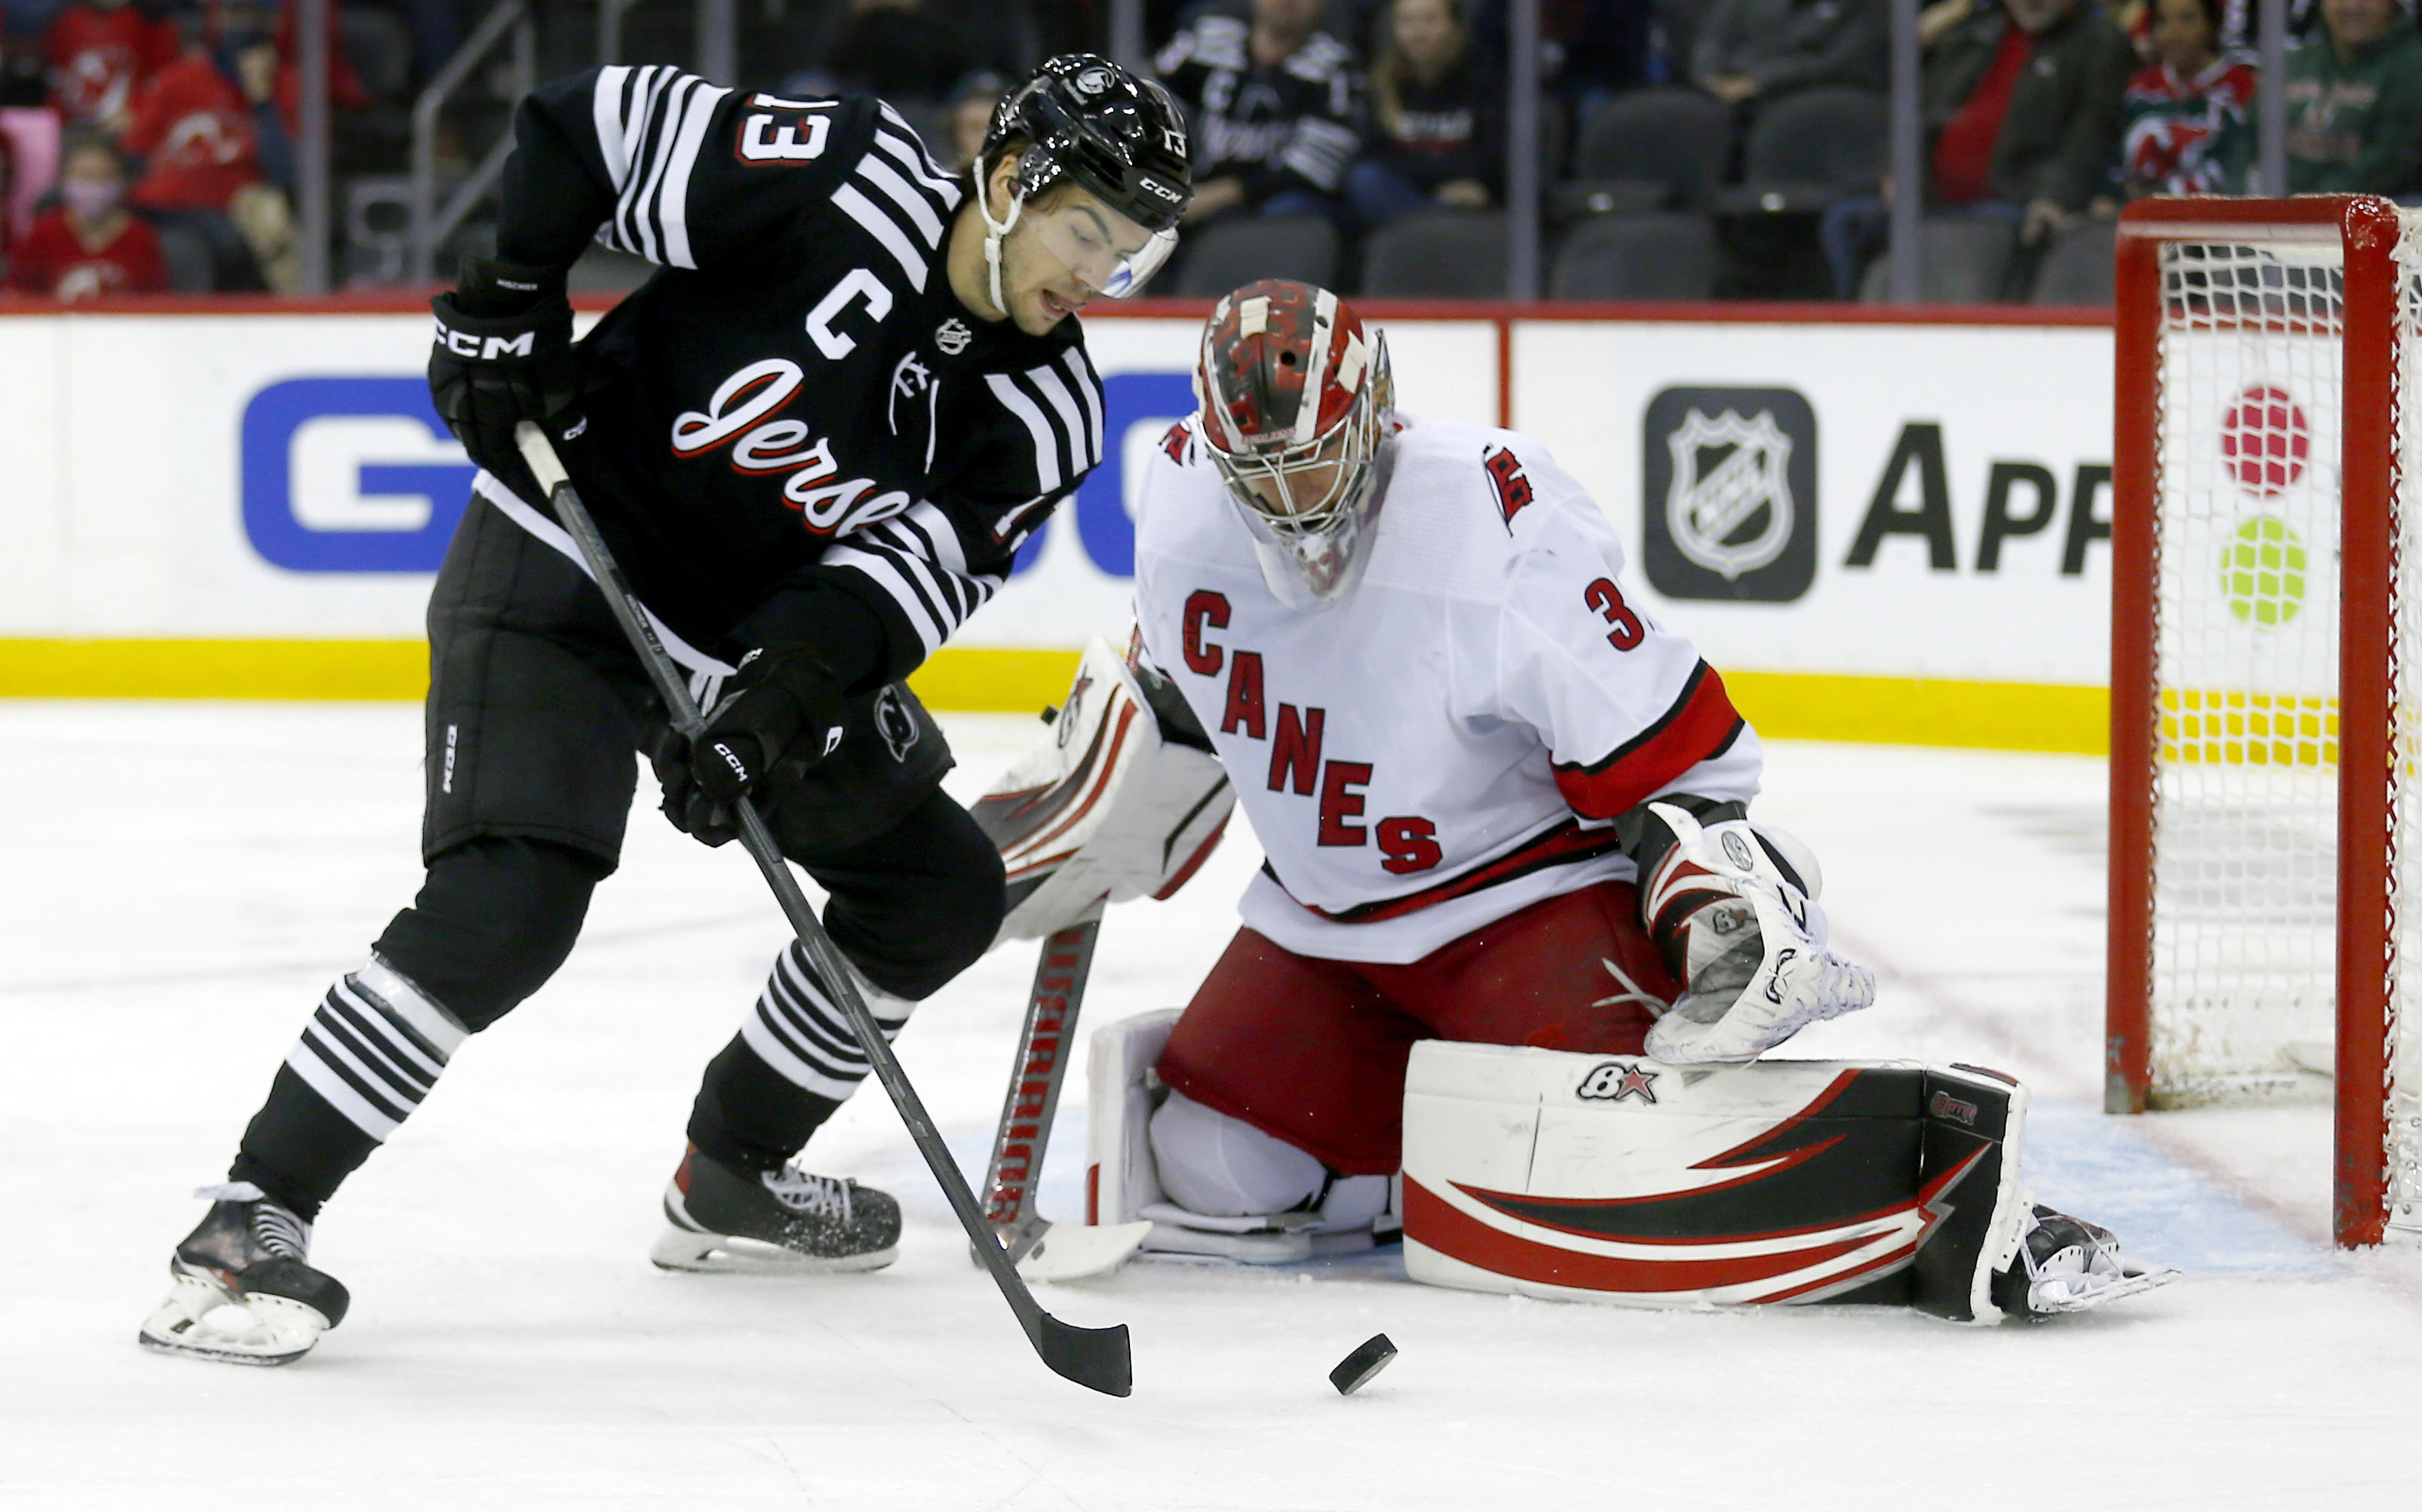 How to Watch the Hurricanes vs. Devils Game: Streaming & TV Info